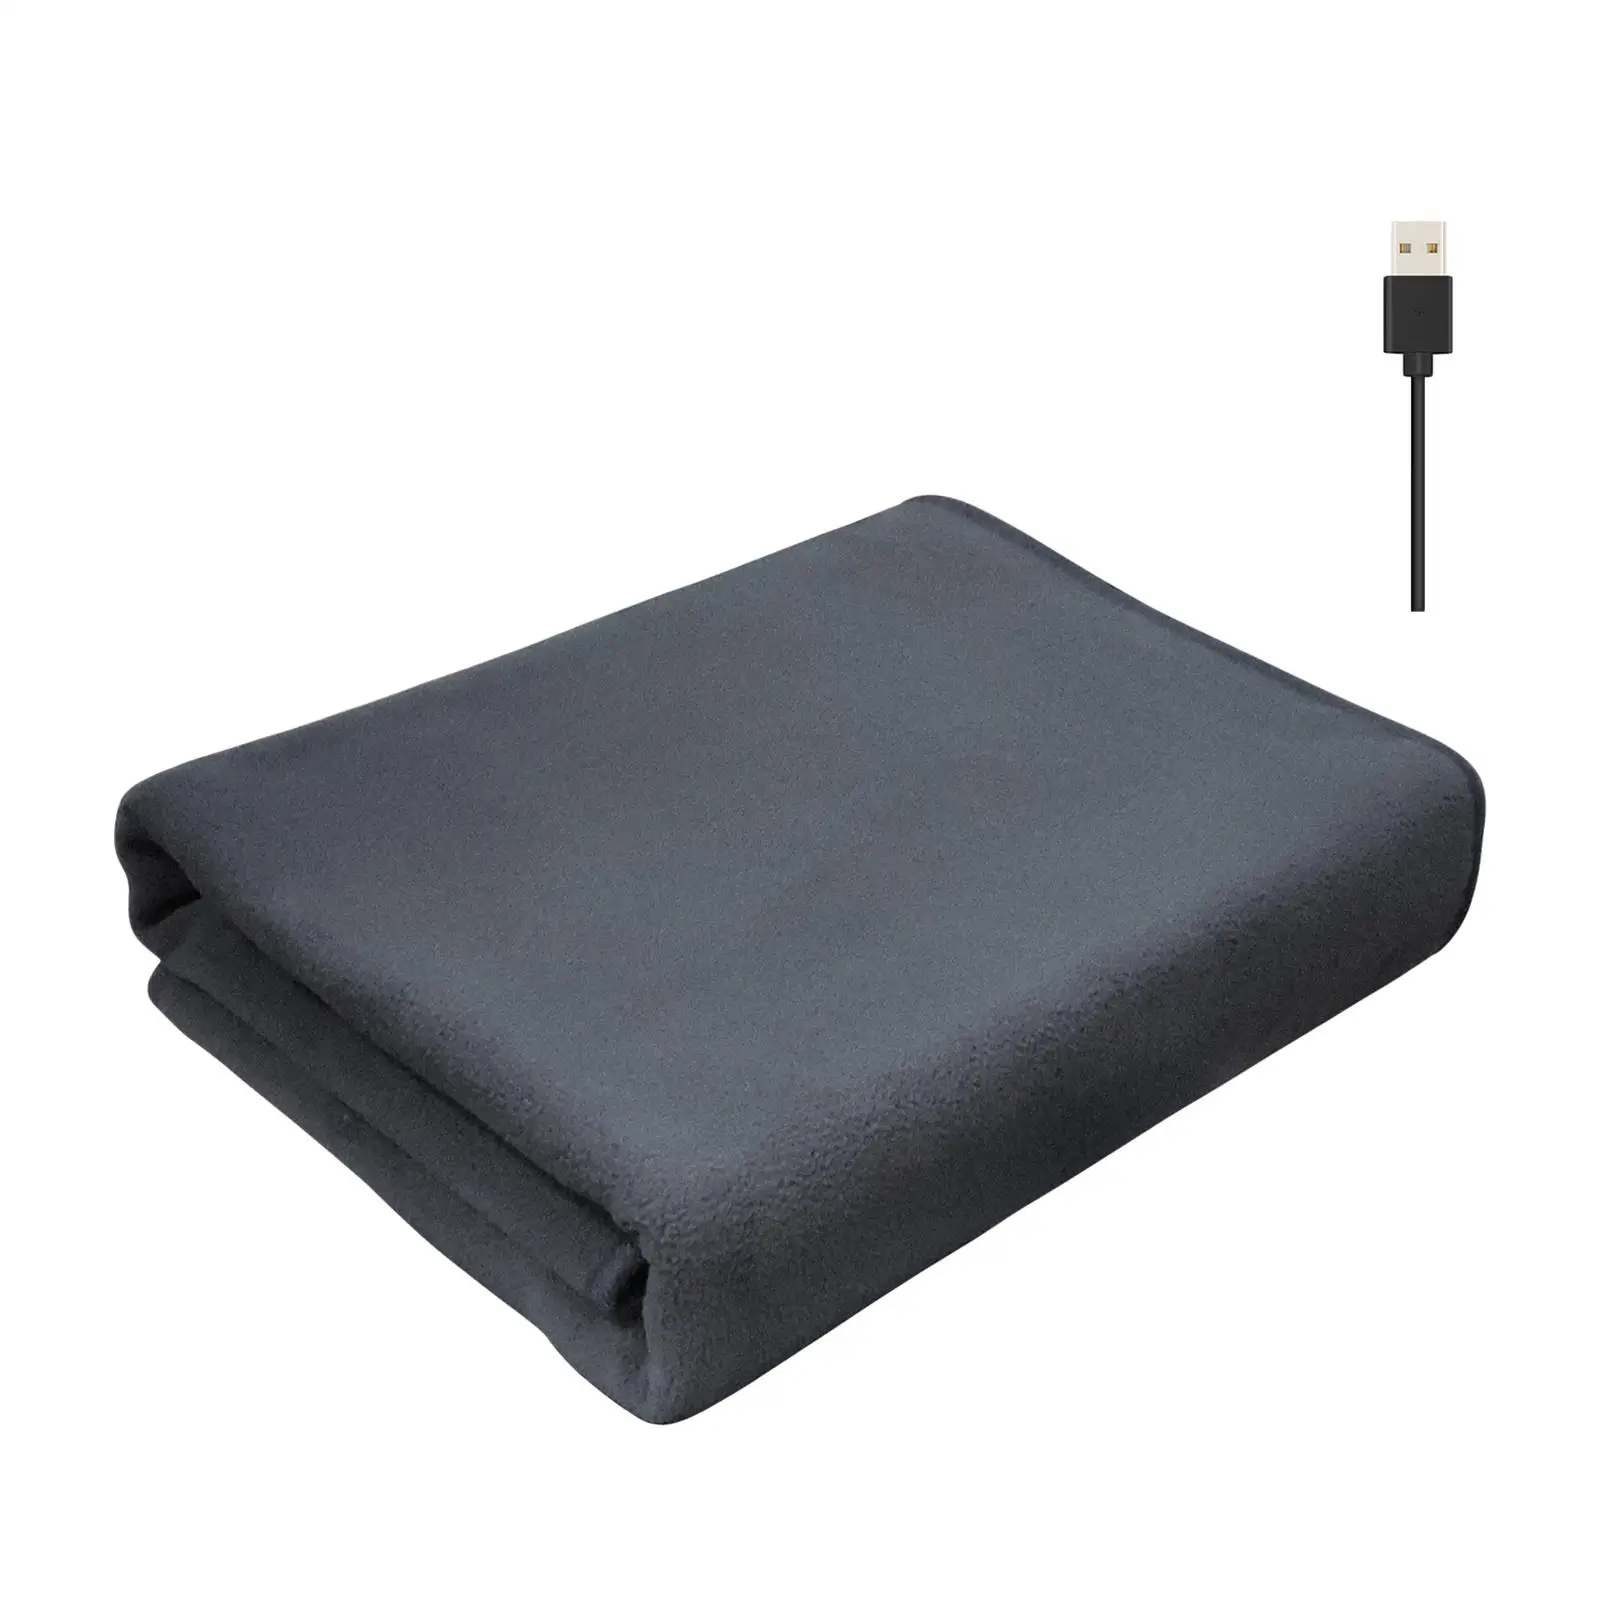 Electric Heated Throw Multipurpose Washable Portable Heating Warm Cape for Outdoor Activities Home Travel Sofa Bed